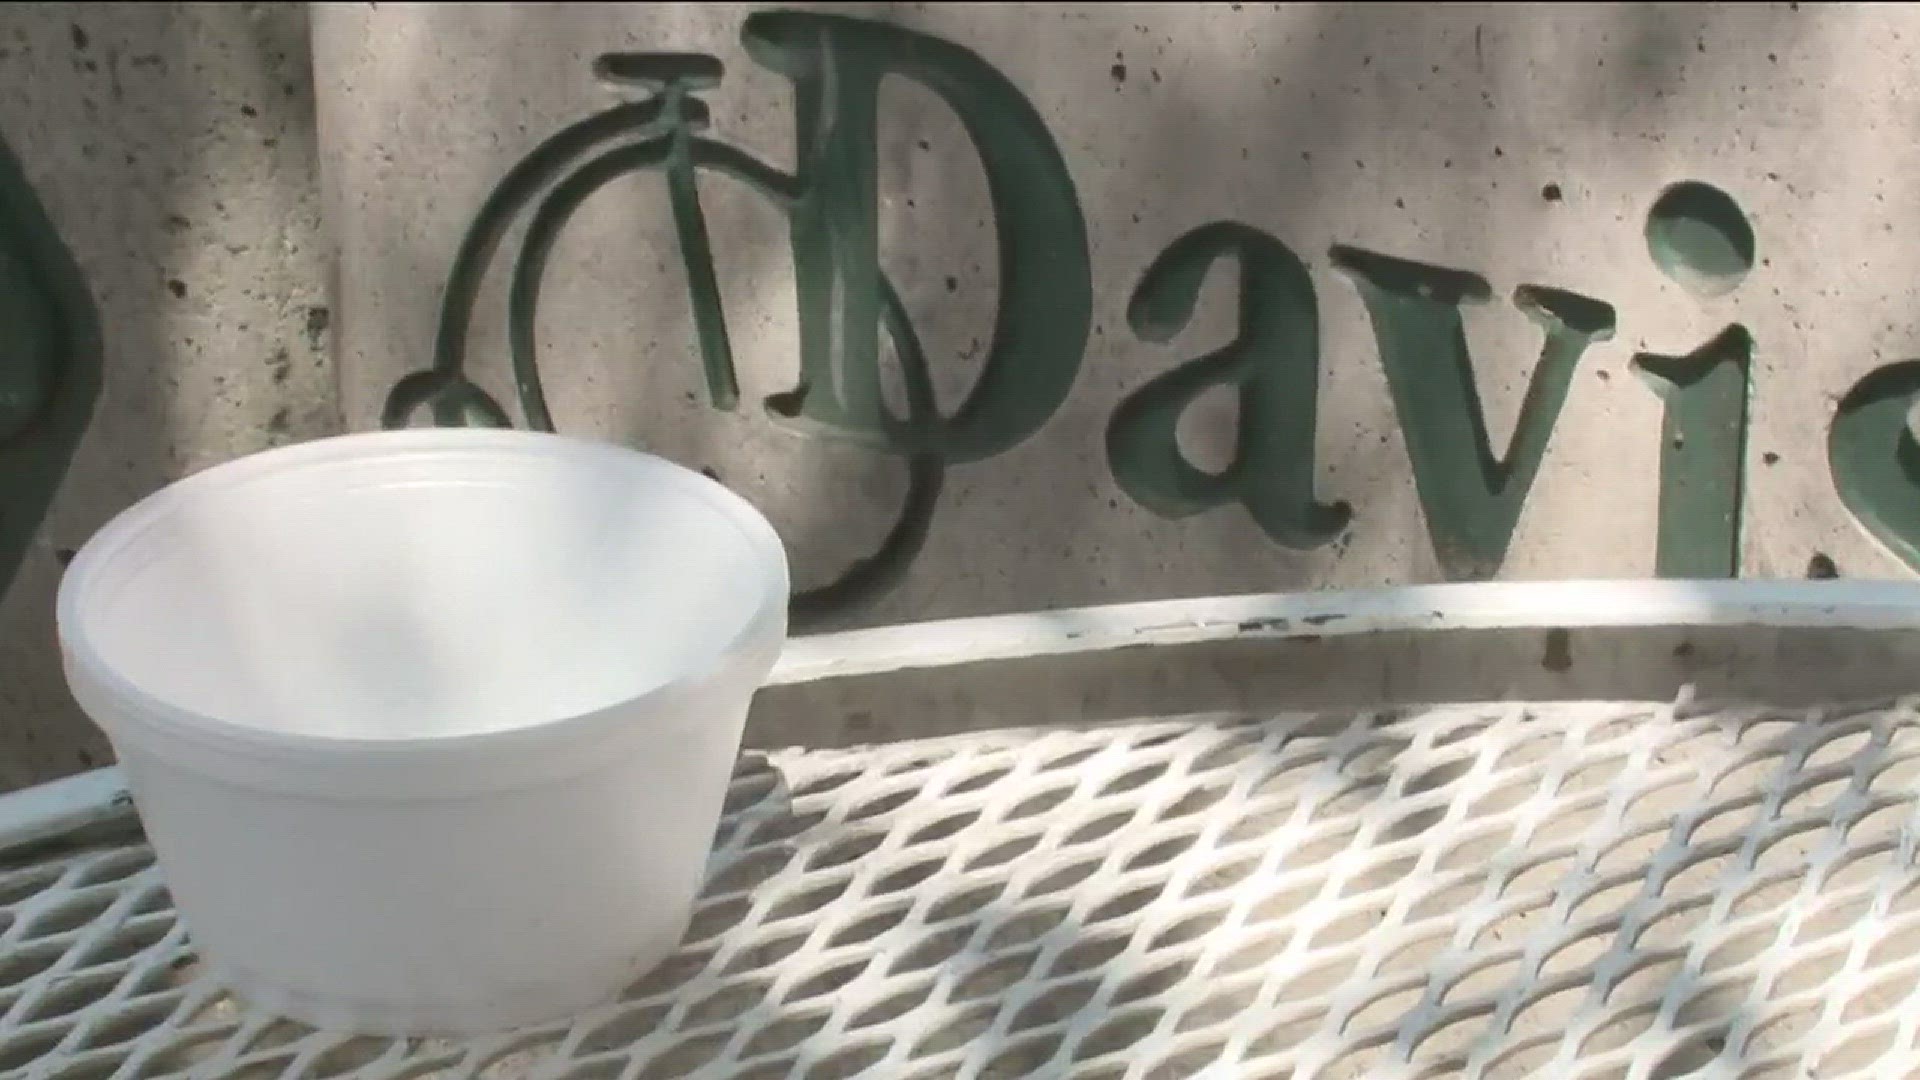 The city of Davis calls for an end to styrofoam in restaurants.